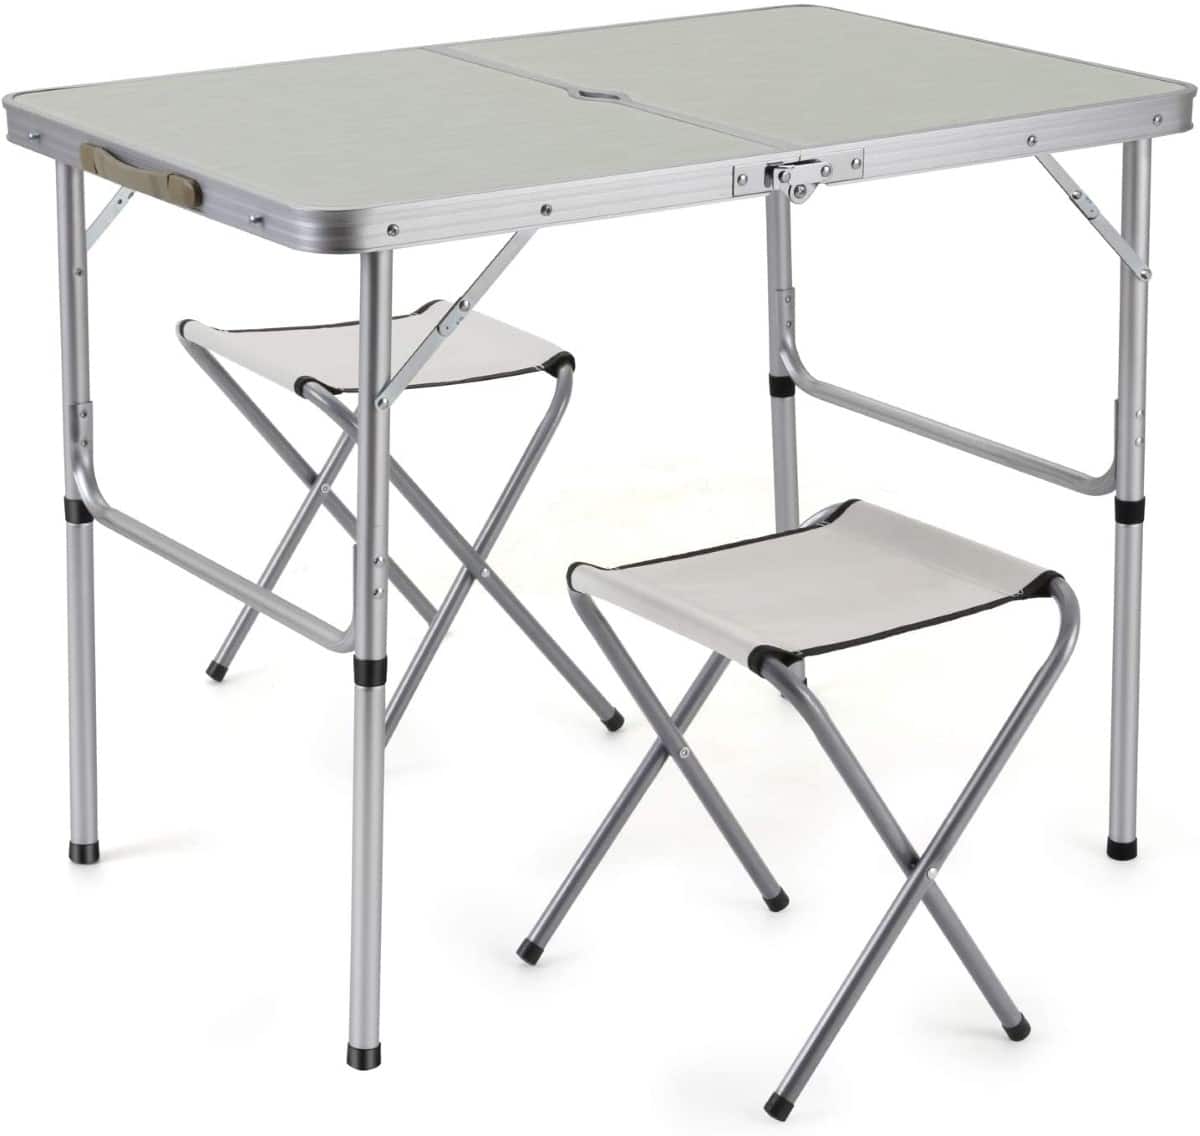 Sunkorto 2-Person Folding Picnic Table With 2 Stools